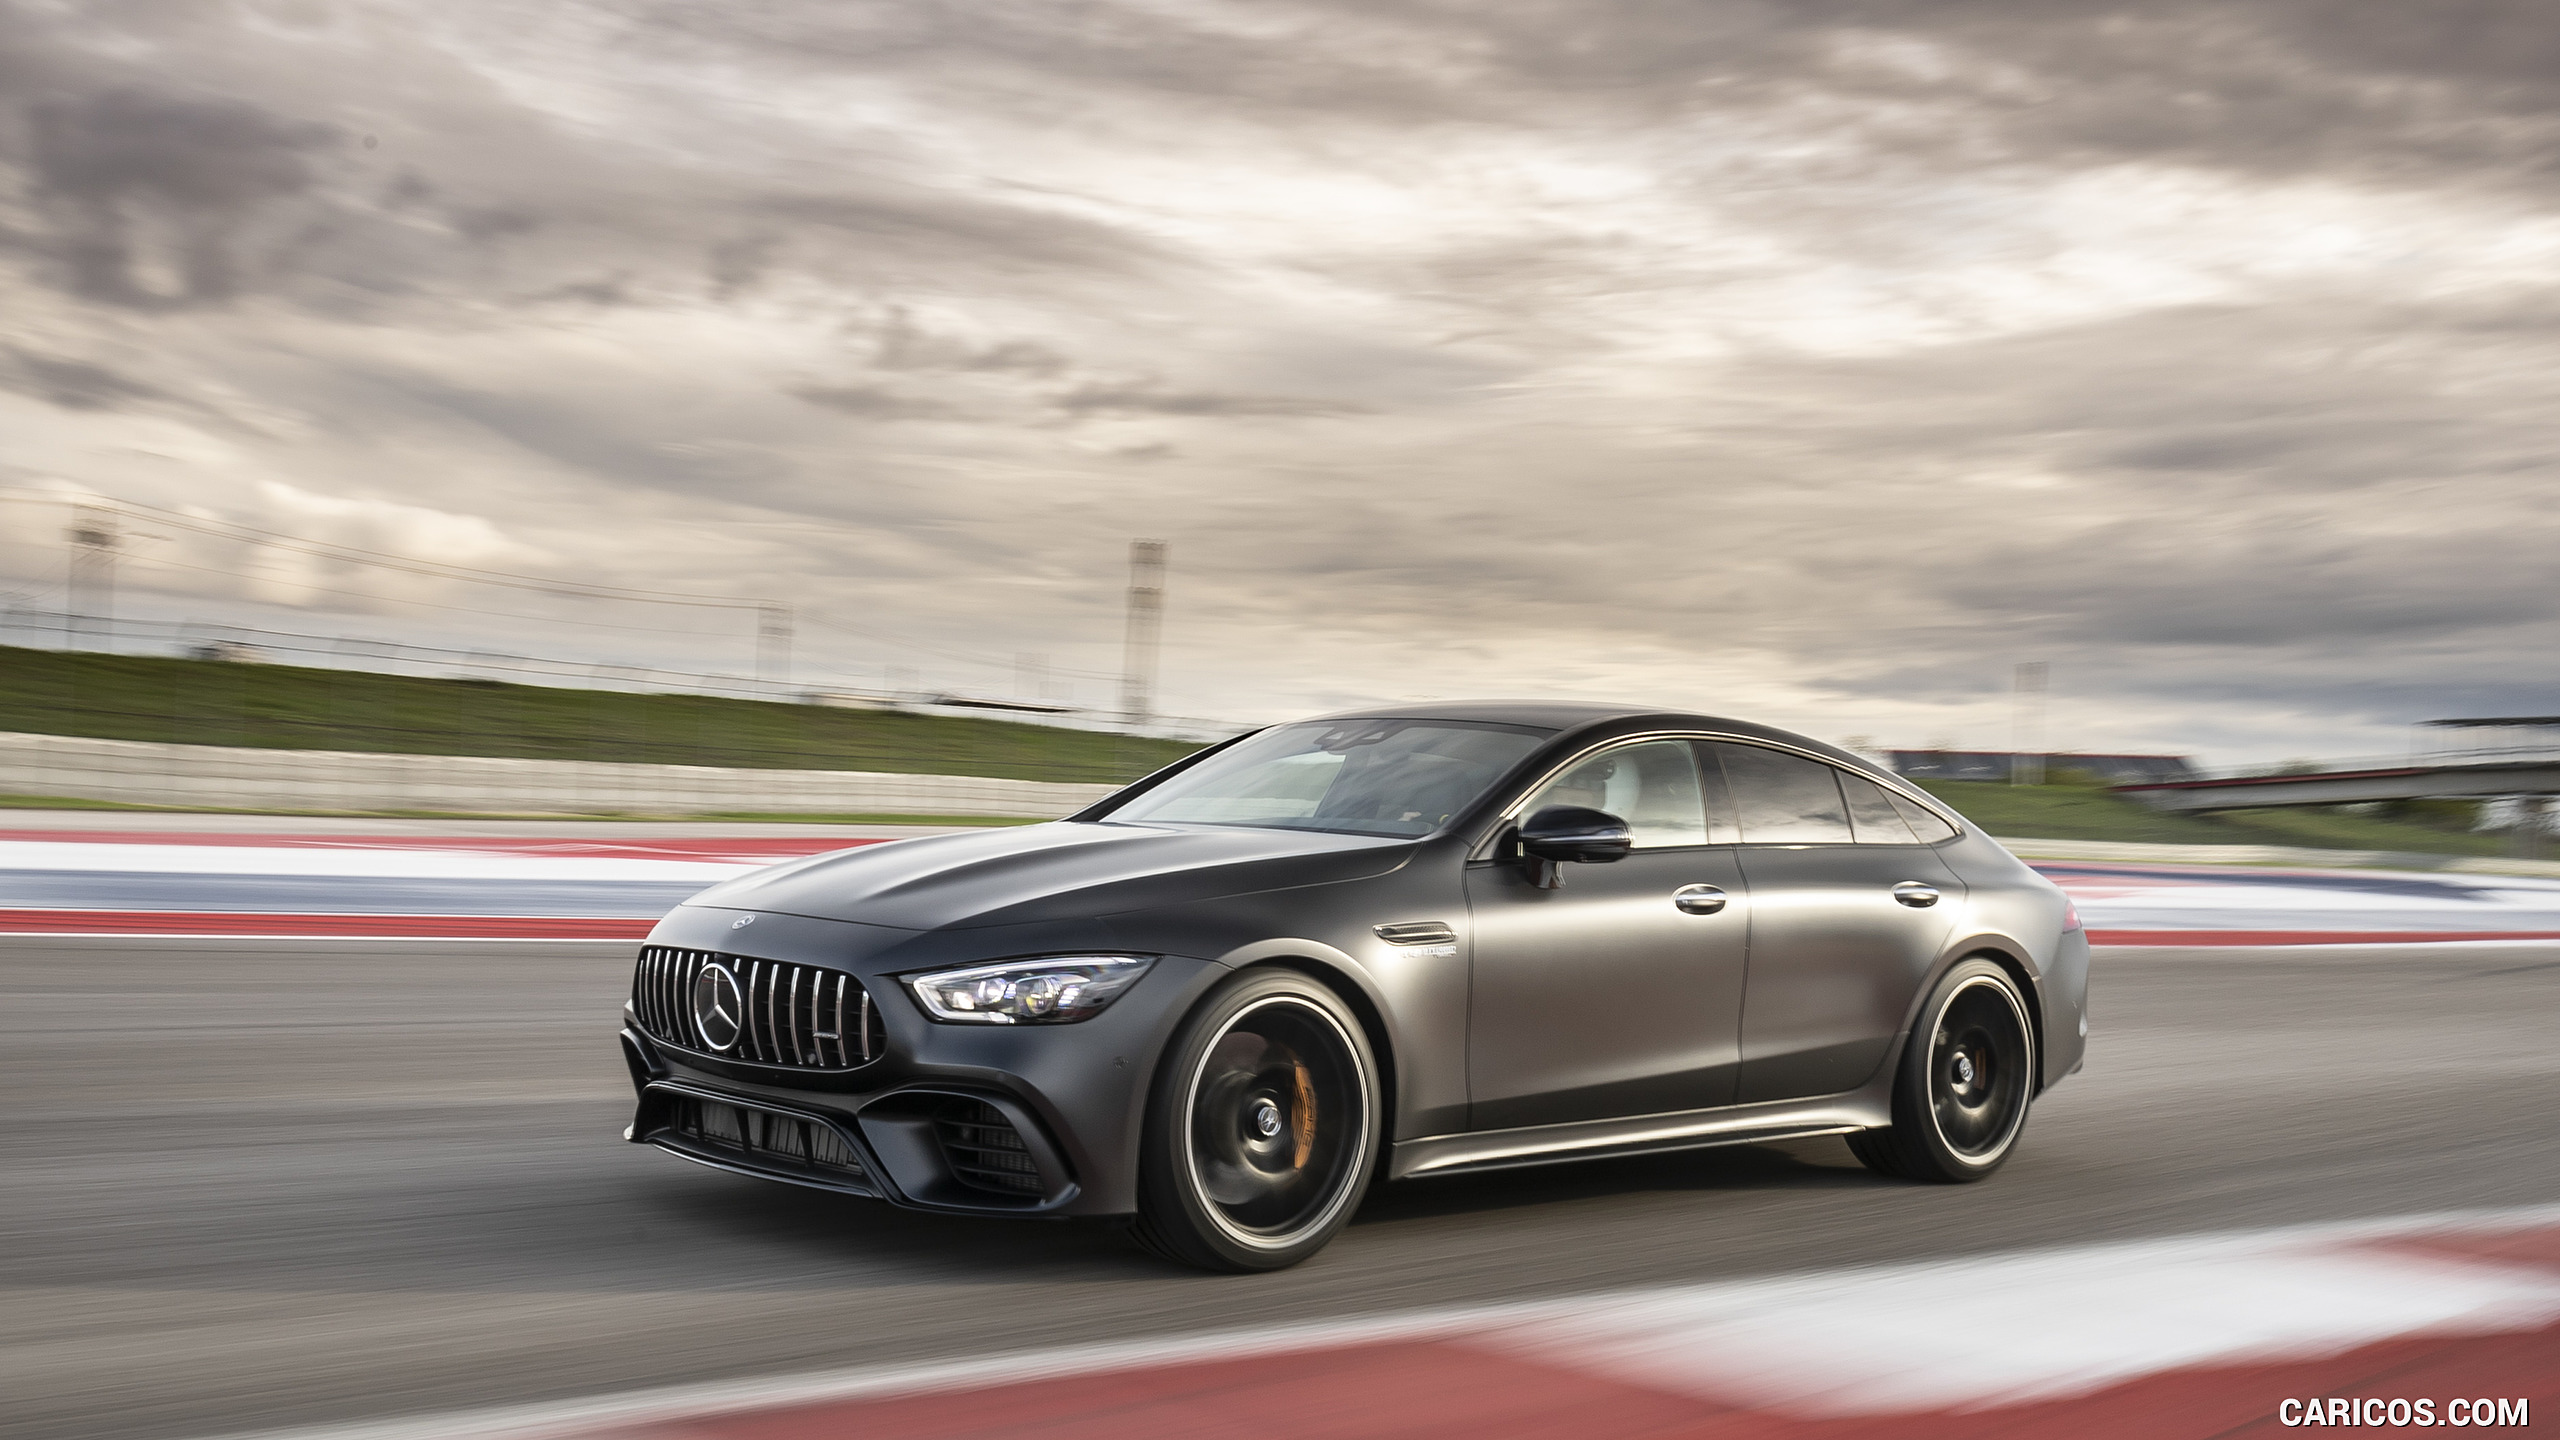 2019 Mercedes-AMG GT 63 S 4MATIC+ 4-Door Coupe - Front Three-Quarter, #177 of 427